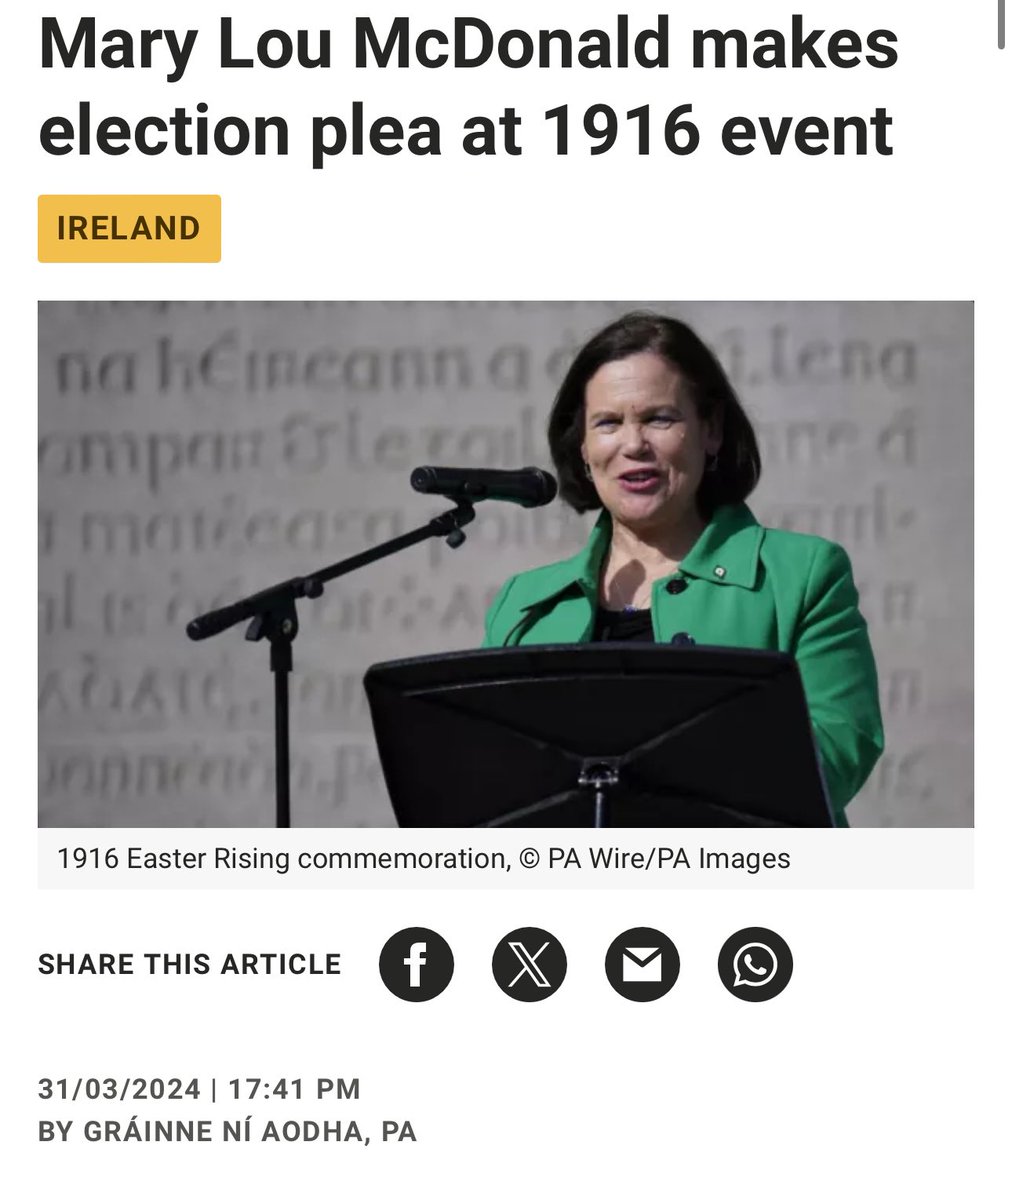 Ireland has less than 1% of a say in the EU and Mary Lou McDonald and Sinn Fein know this. At the commemoration of the events that led to Ireland taking back its sovereignty the Sinn Féin leader said that while Ireland’s “place is within the European Union”, the party would…